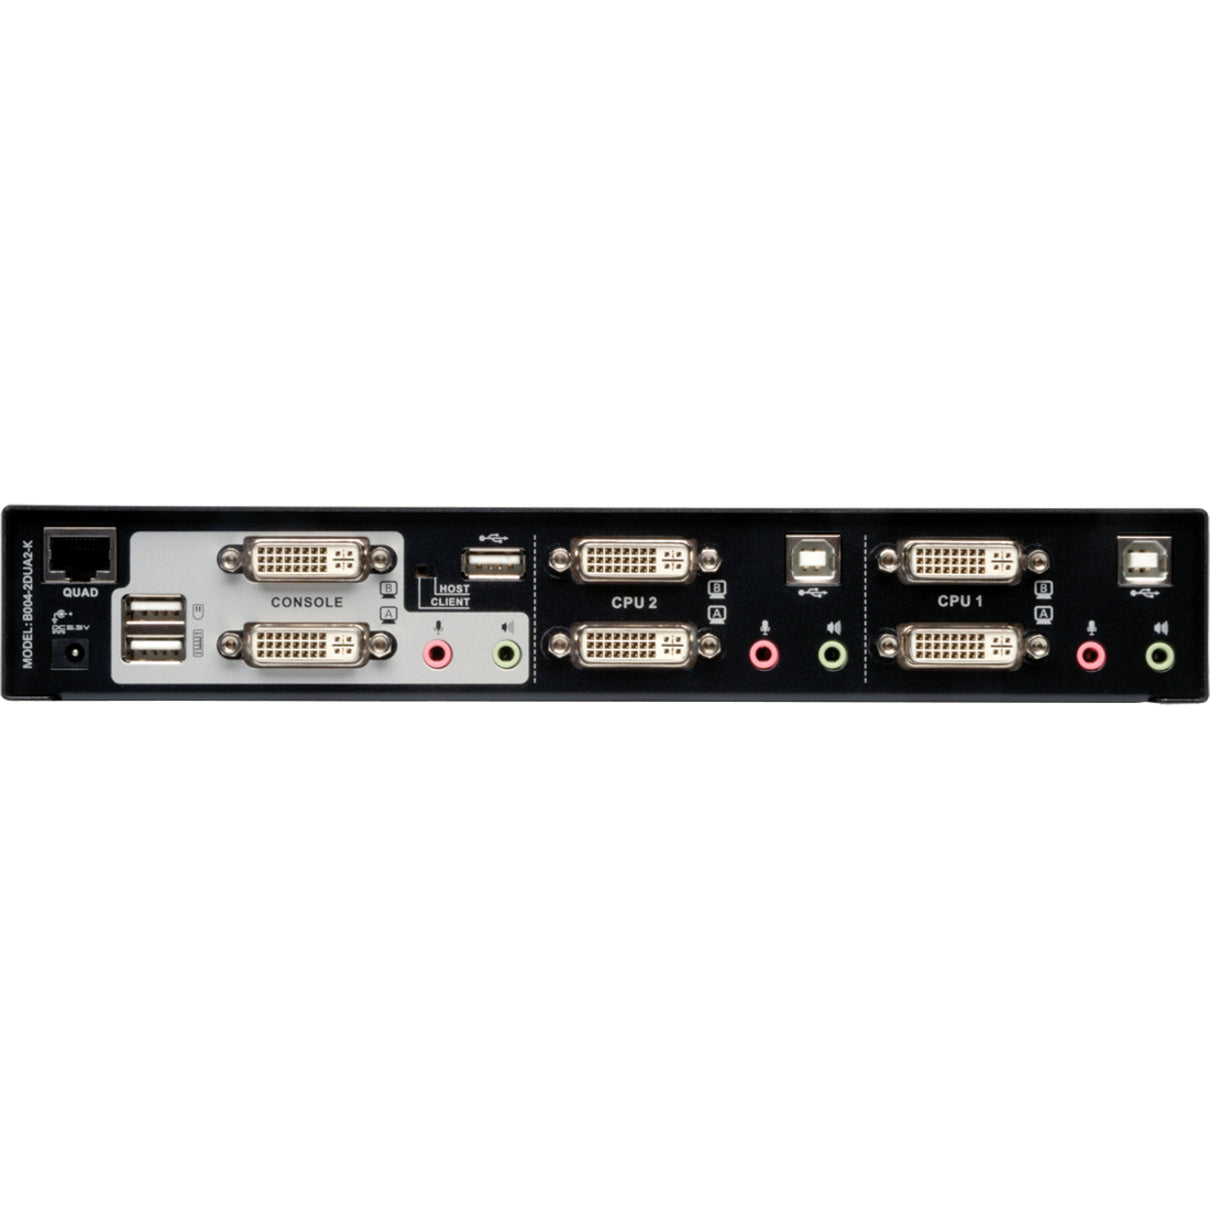 Tripp Lite B004-2DUA2-K 2-Port Dual Monitor DVI KVM Switch with Audio and USB 2.0 Hub, Cables included